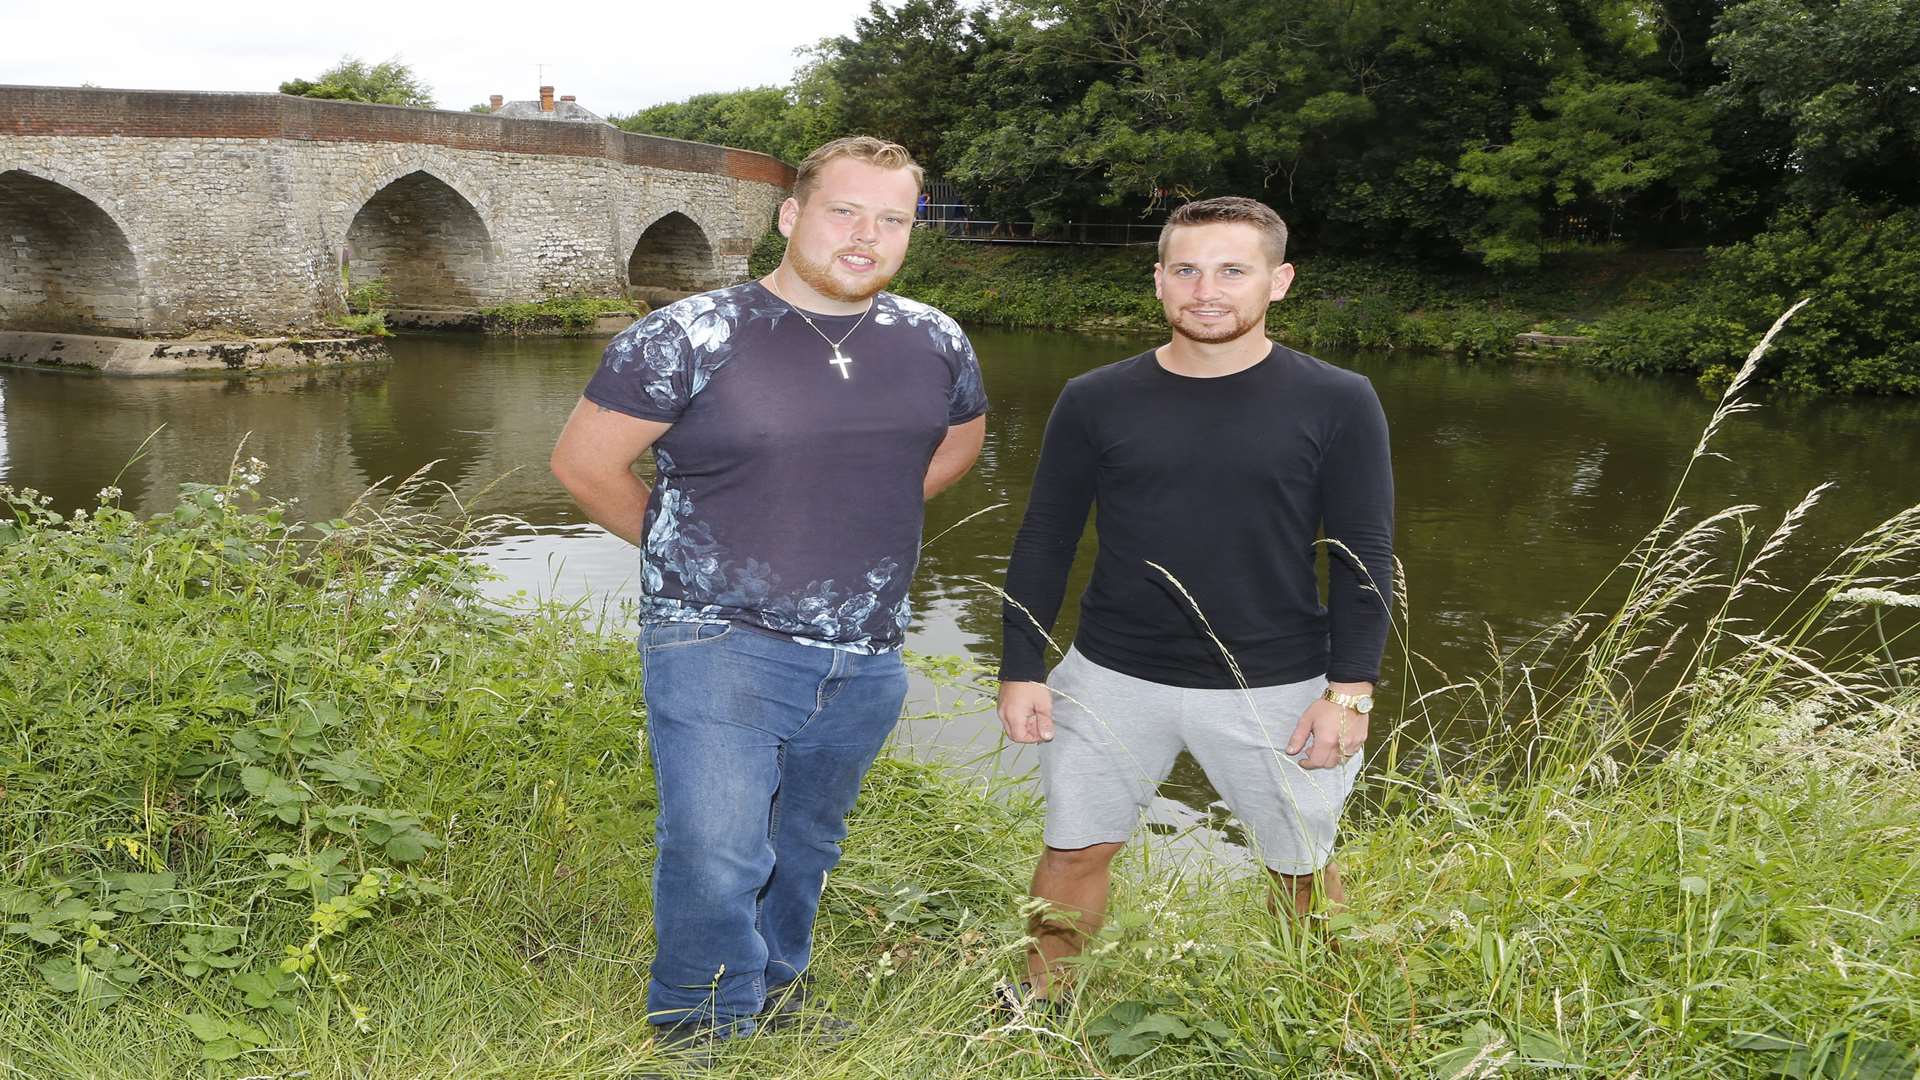 Friends Jordan Smith and Luke Ellerby where they saved a drowning man and his five-year-old son